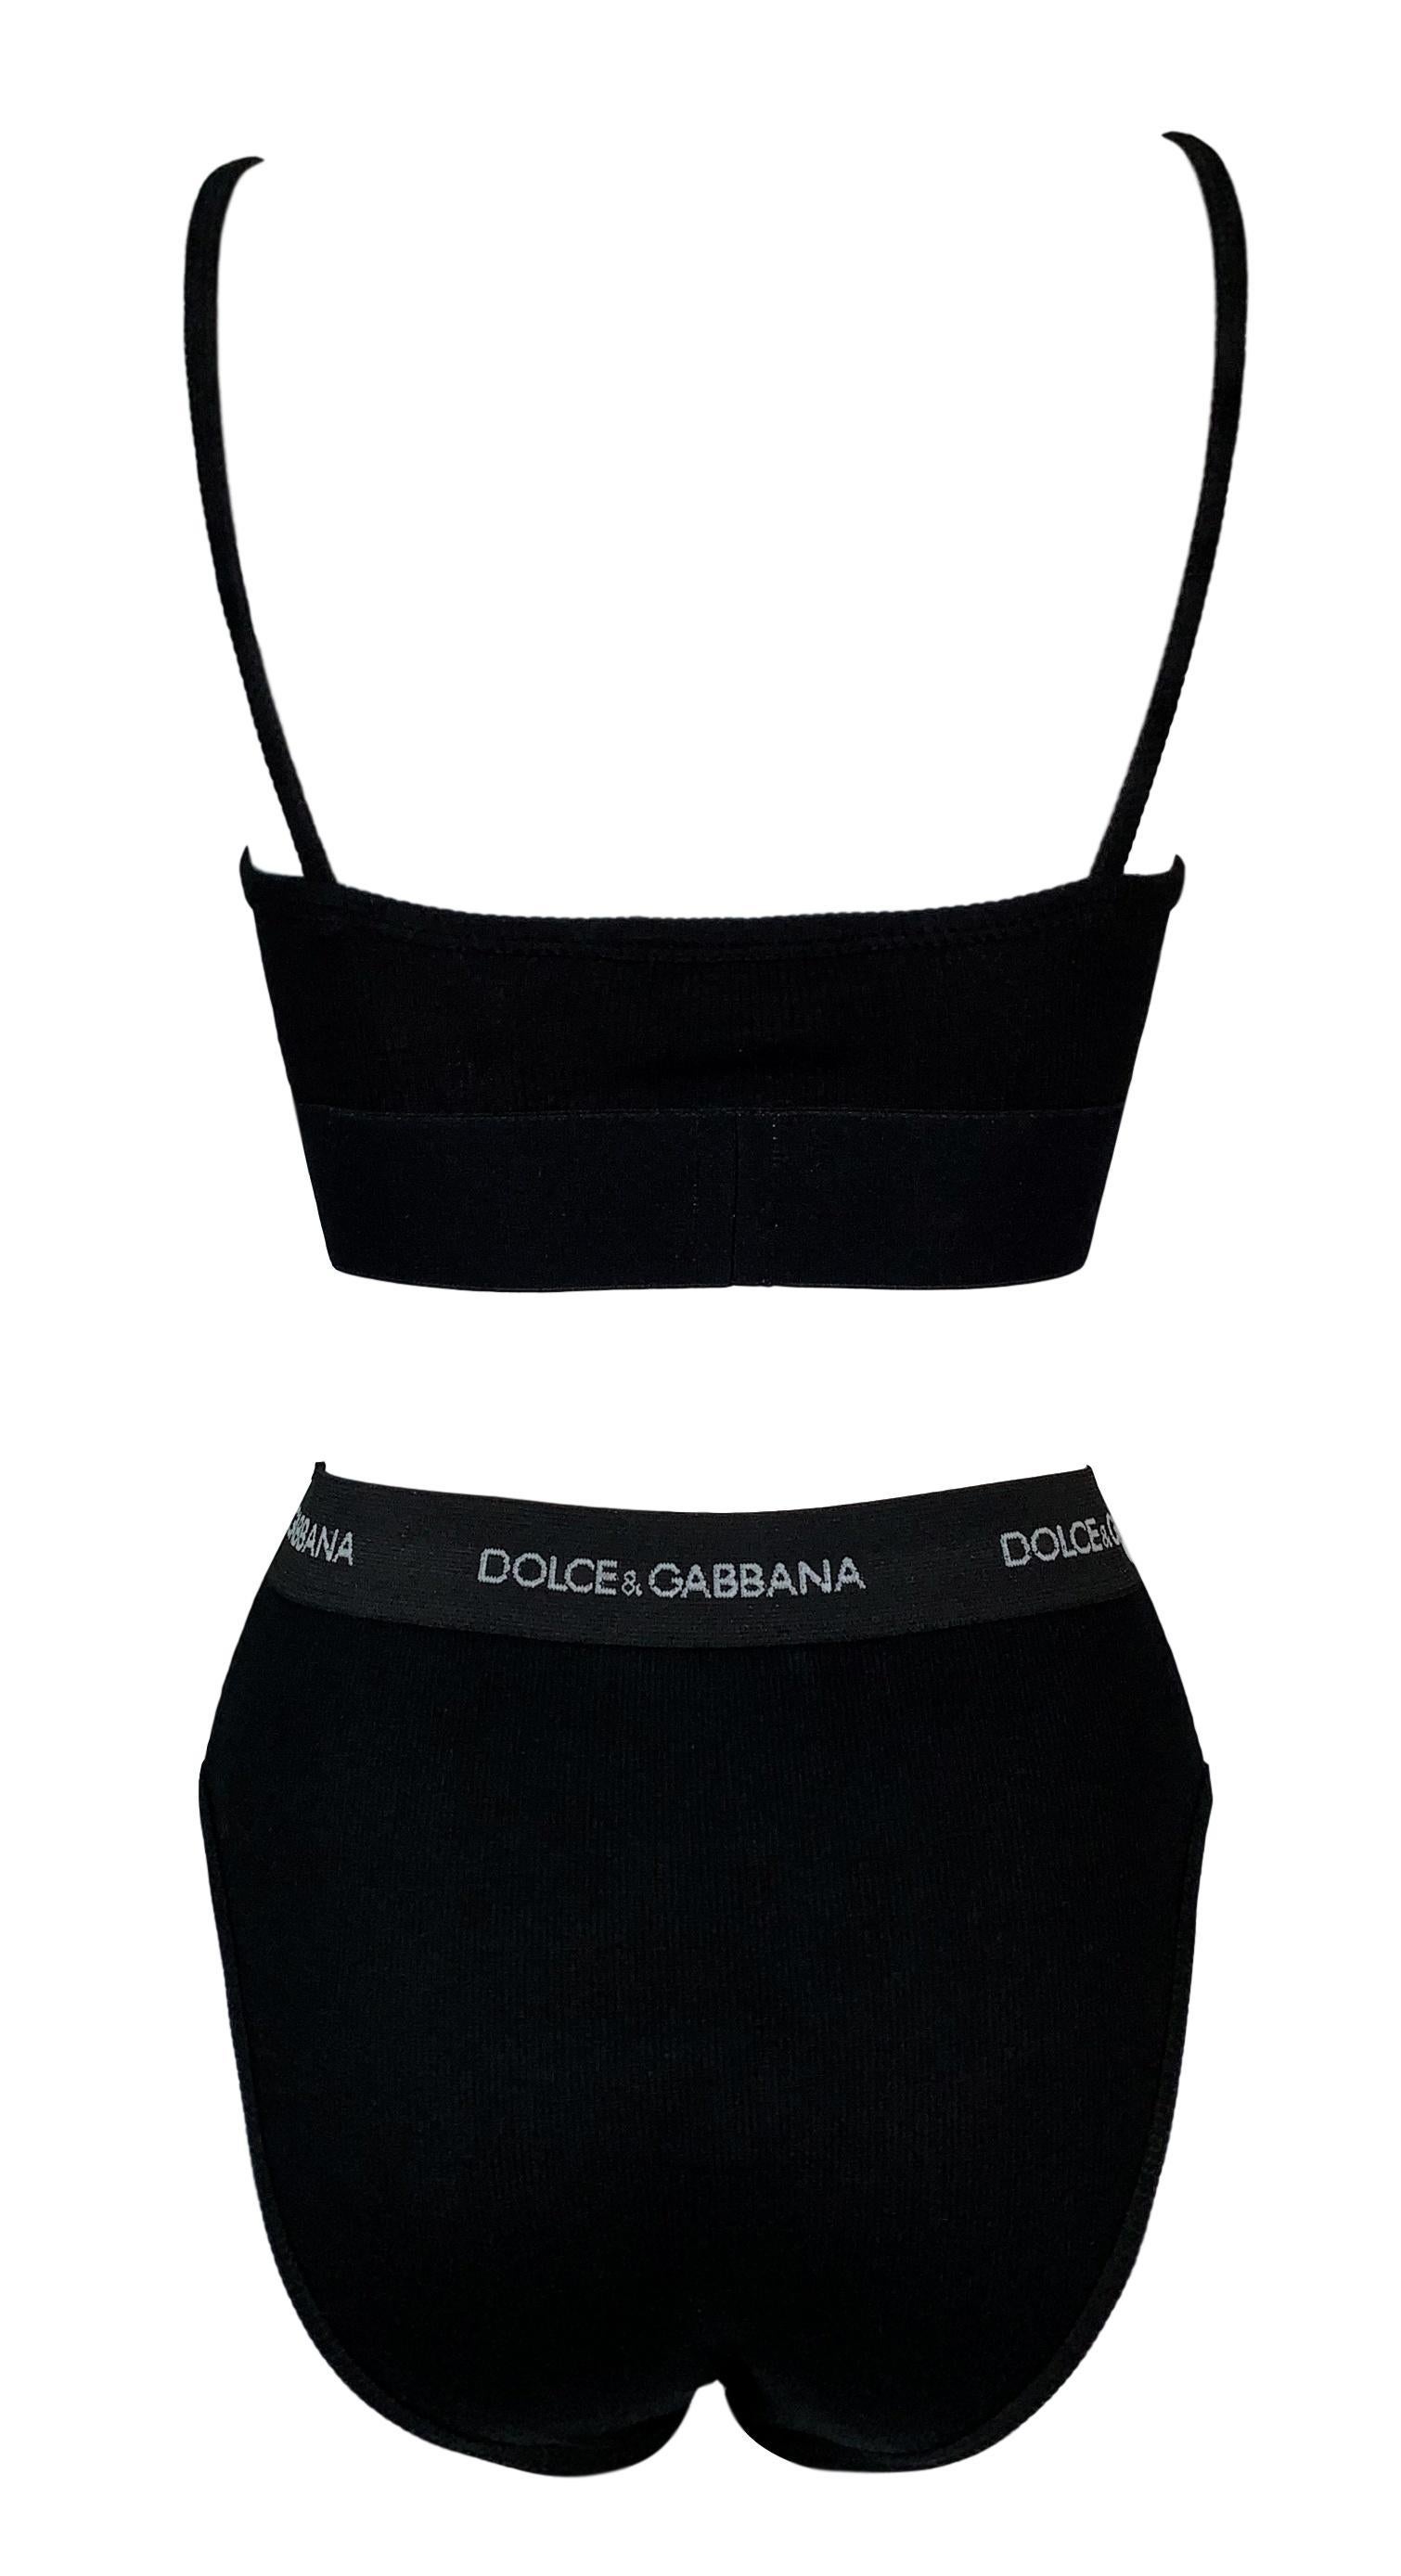 DESIGNER: 1990's Dolce & Gabbana

Please contact for more information and/or photos.

CONDITION: Good- Panty is unworn, crop top is in good condition with no flaws. 

FABRIC: Cotton & Spandex

COUNTRY MADE: Italy

SIZE: 42

MEASUREMENTS; provided as